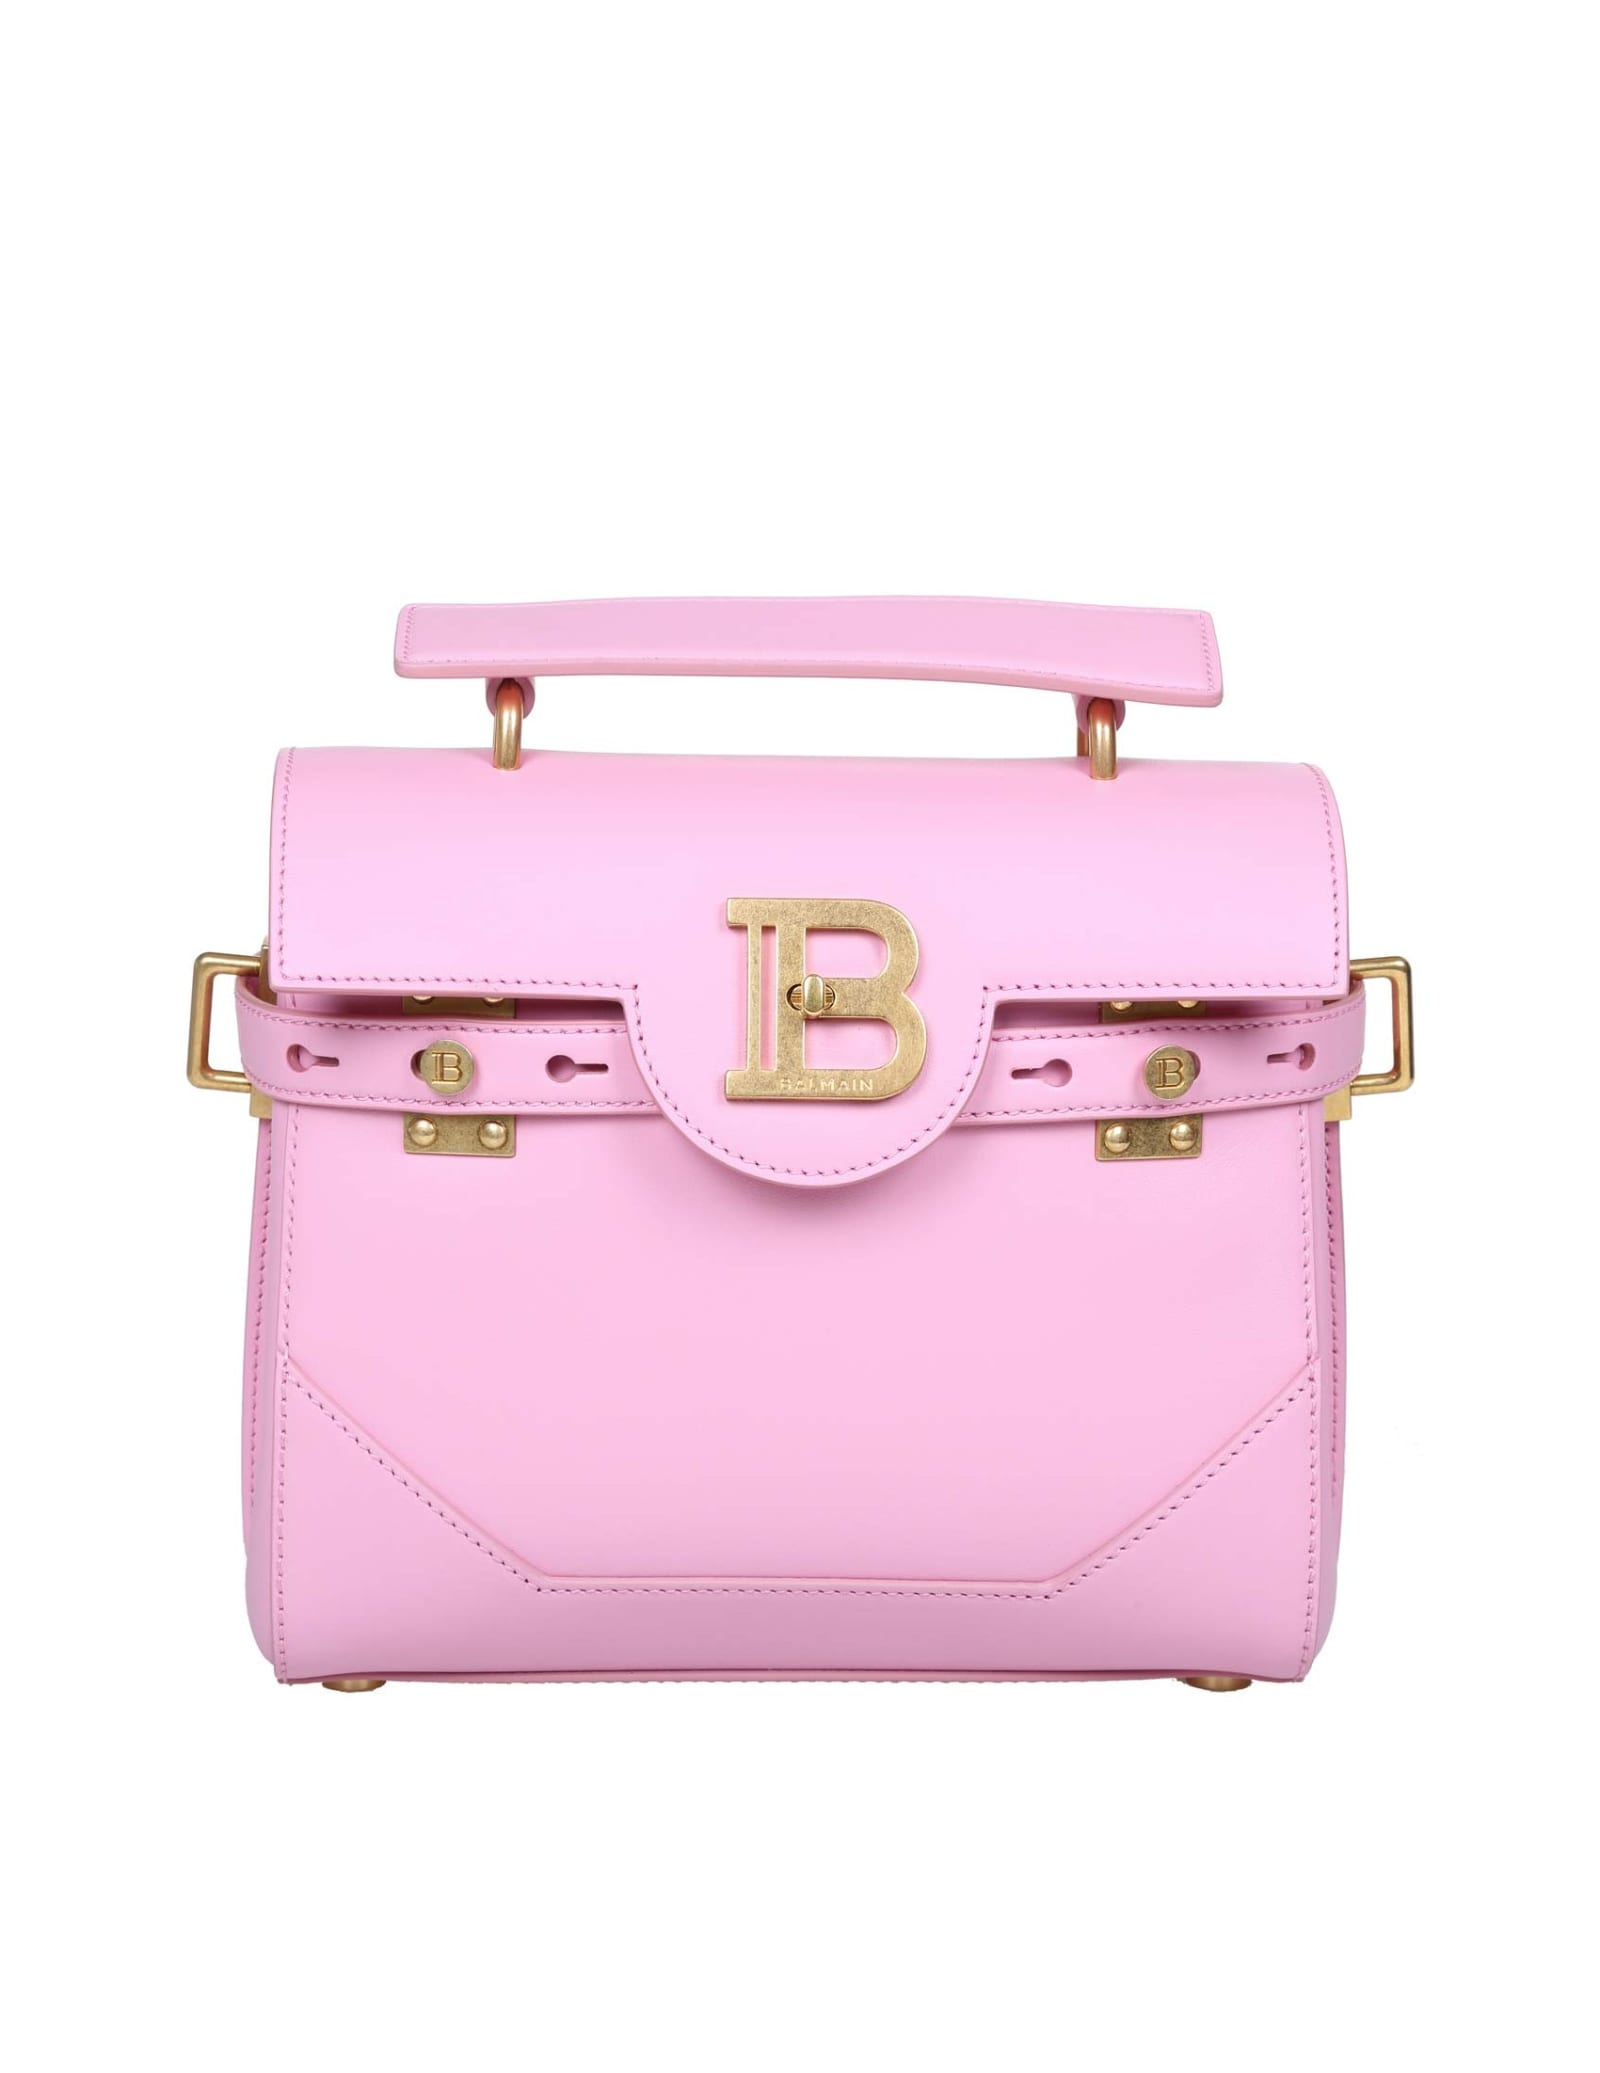 Balmain B-buzz 23 Bag In Pink Color Leather